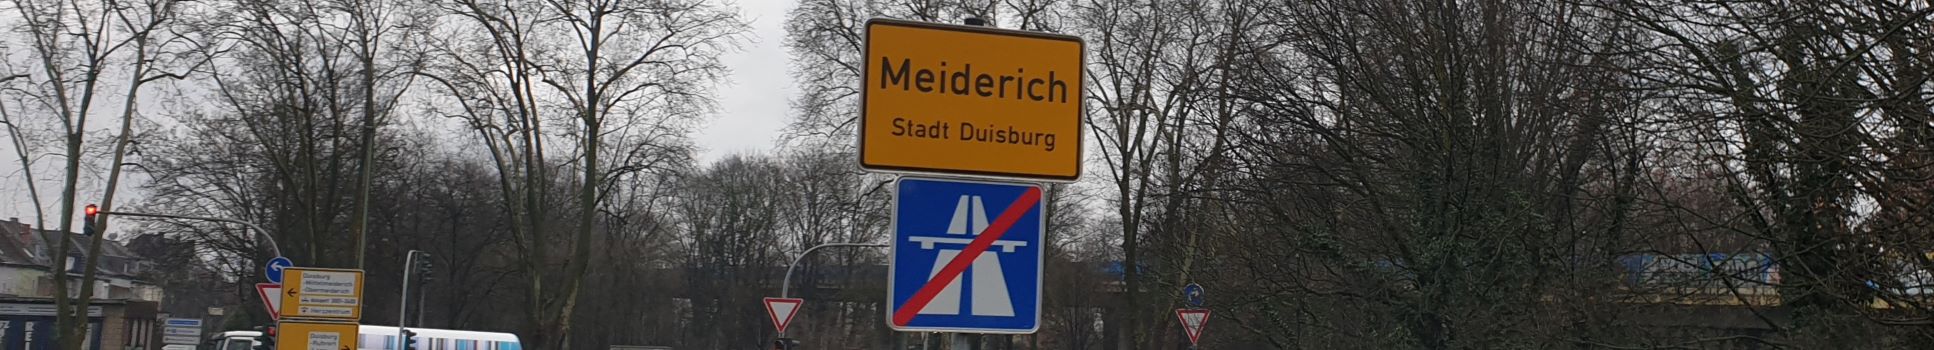 Meiderich Ortseingang